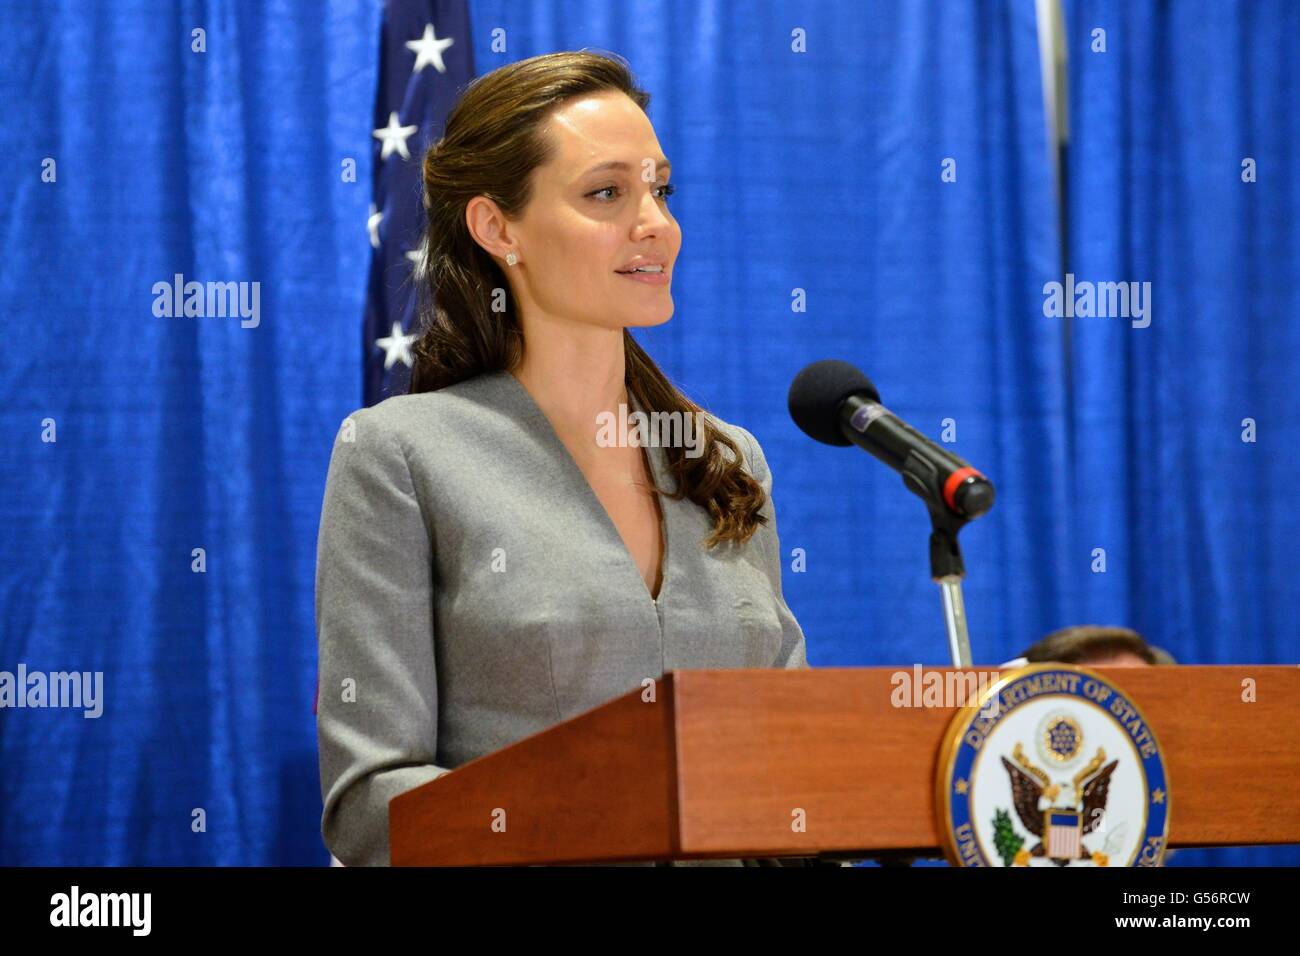 UNHCR Special Envoy Angelina Jolie Pitt addresses the audience at an interfaith Iftar reception to mark World Refugee Day at the All Dulles Area Muslim Society June 20, 2016 in Sterling, Virginia. Stock Photo